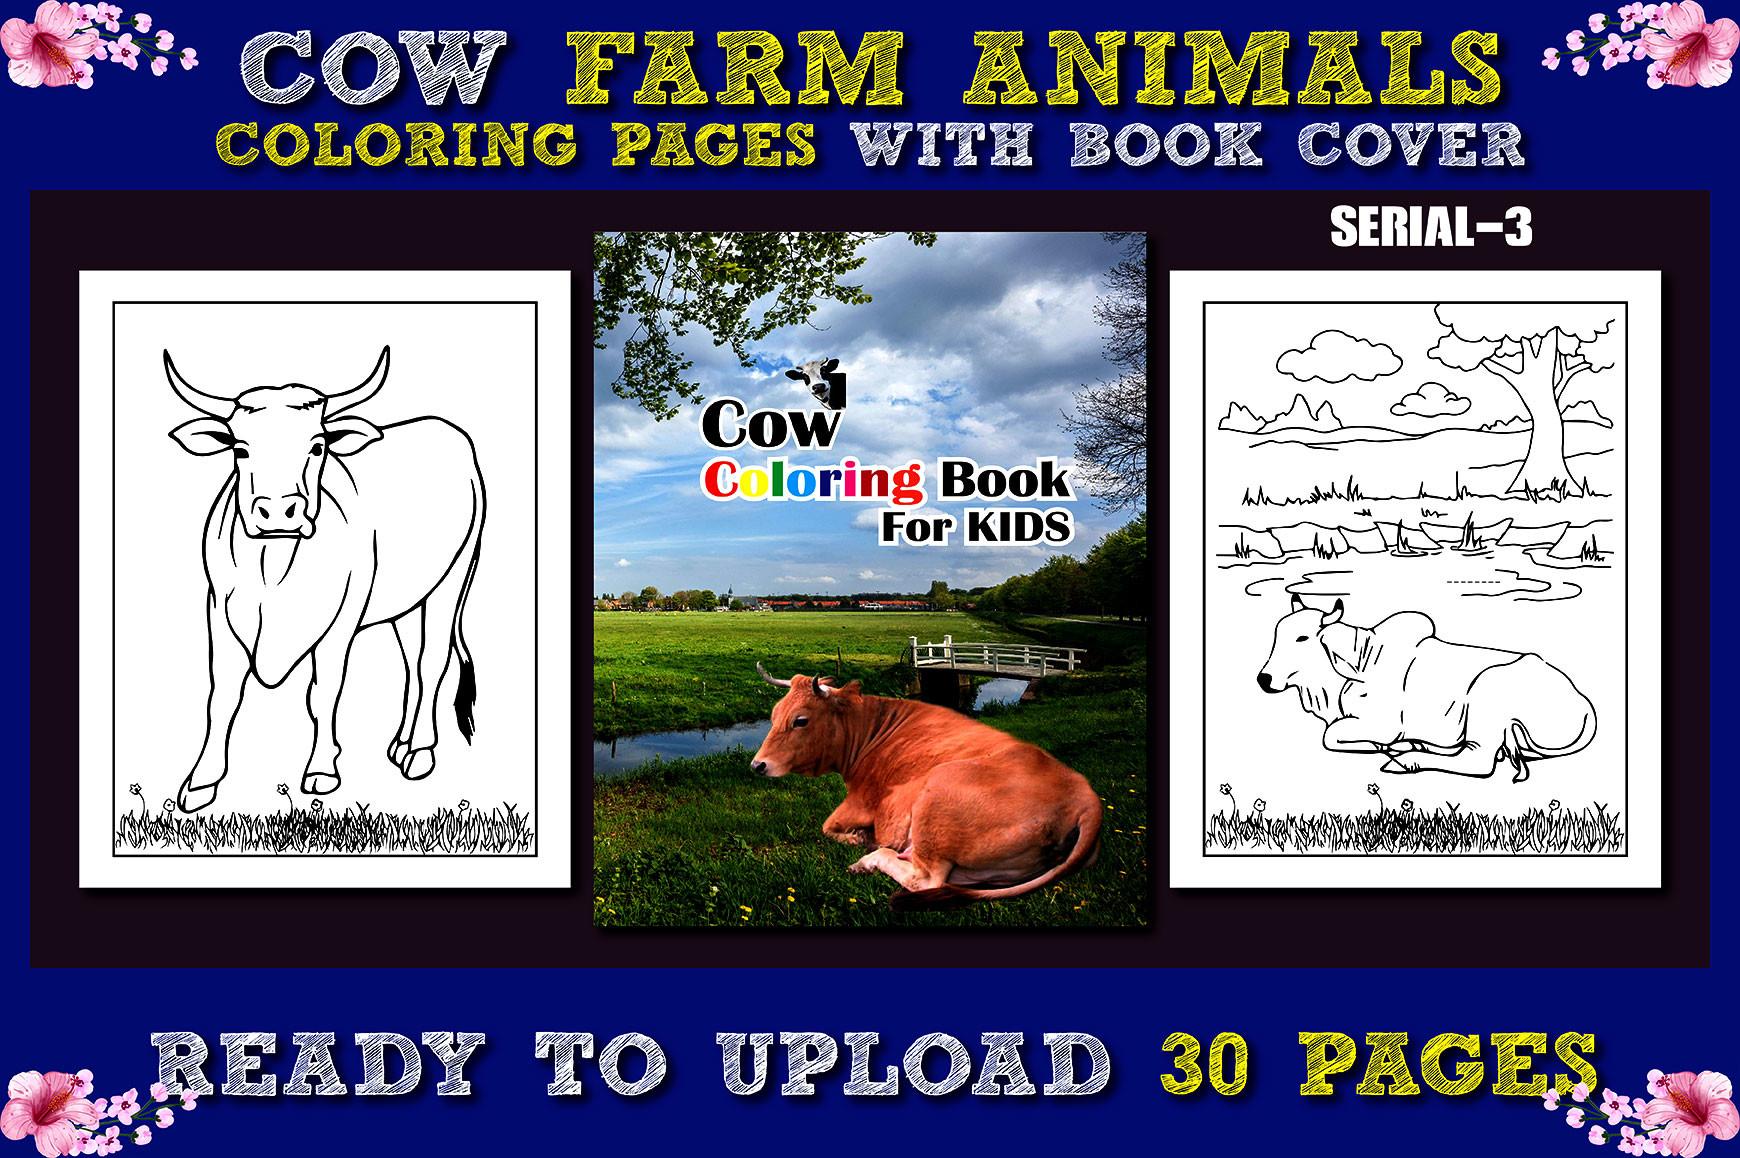 Cow Farm Animals Coloring Pages Vol-3